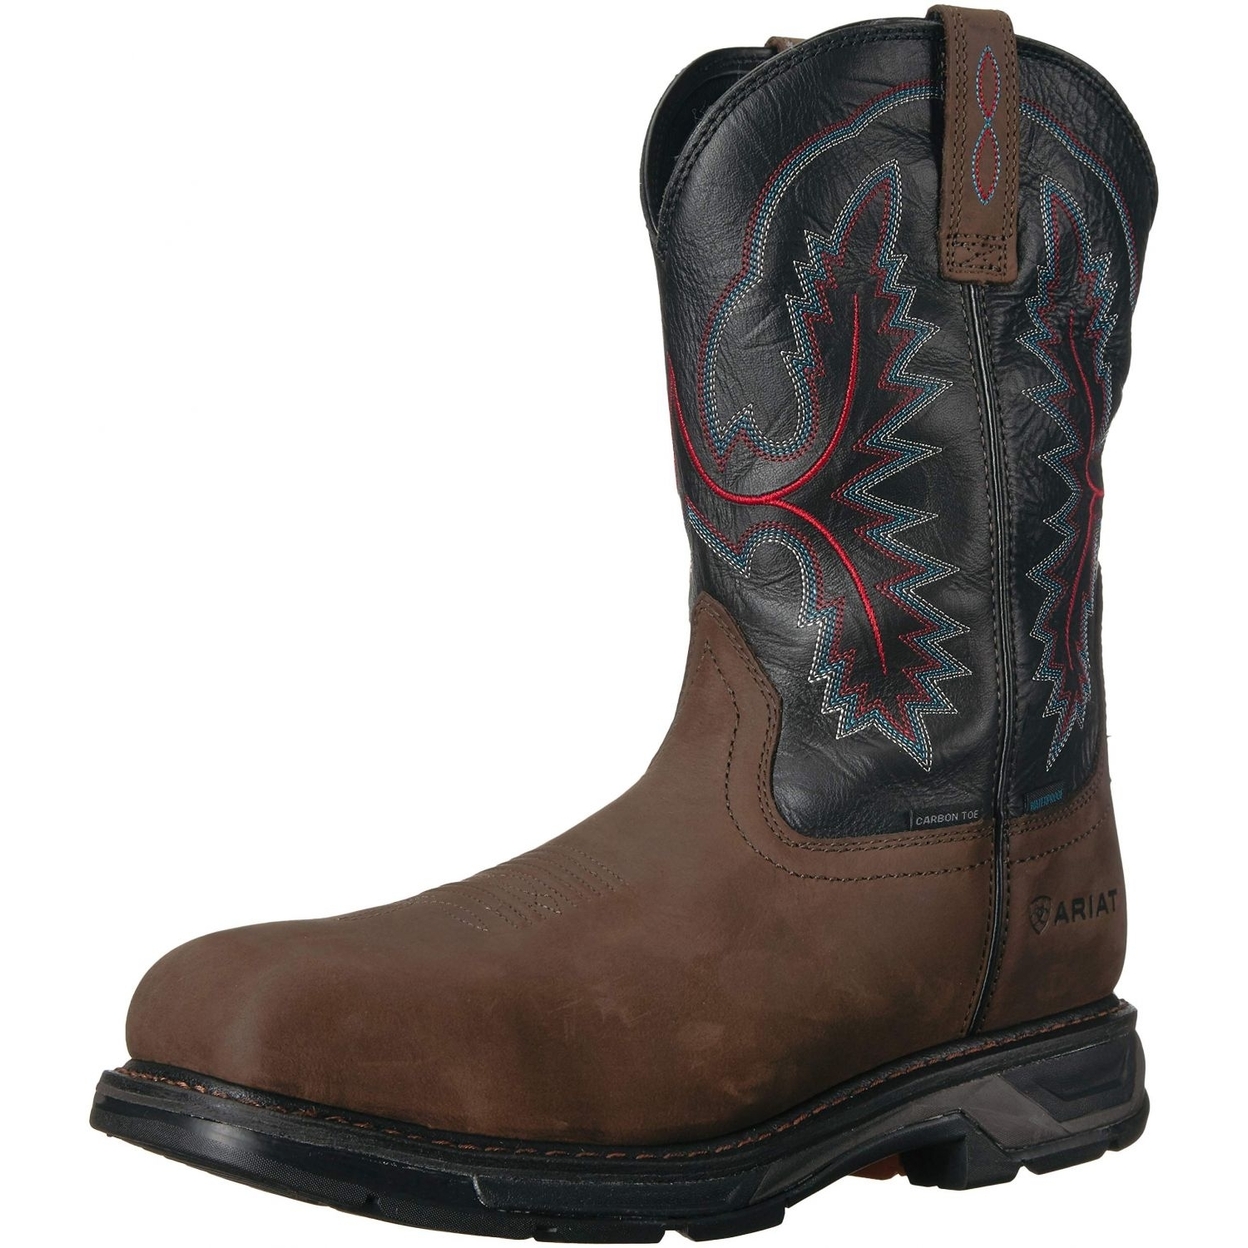 Ariat Work Men's Workhog XT H2O Carbon Toe Western Boot ONE SIZE BRK/ FOREST - BRK/ FOREST, 11-D